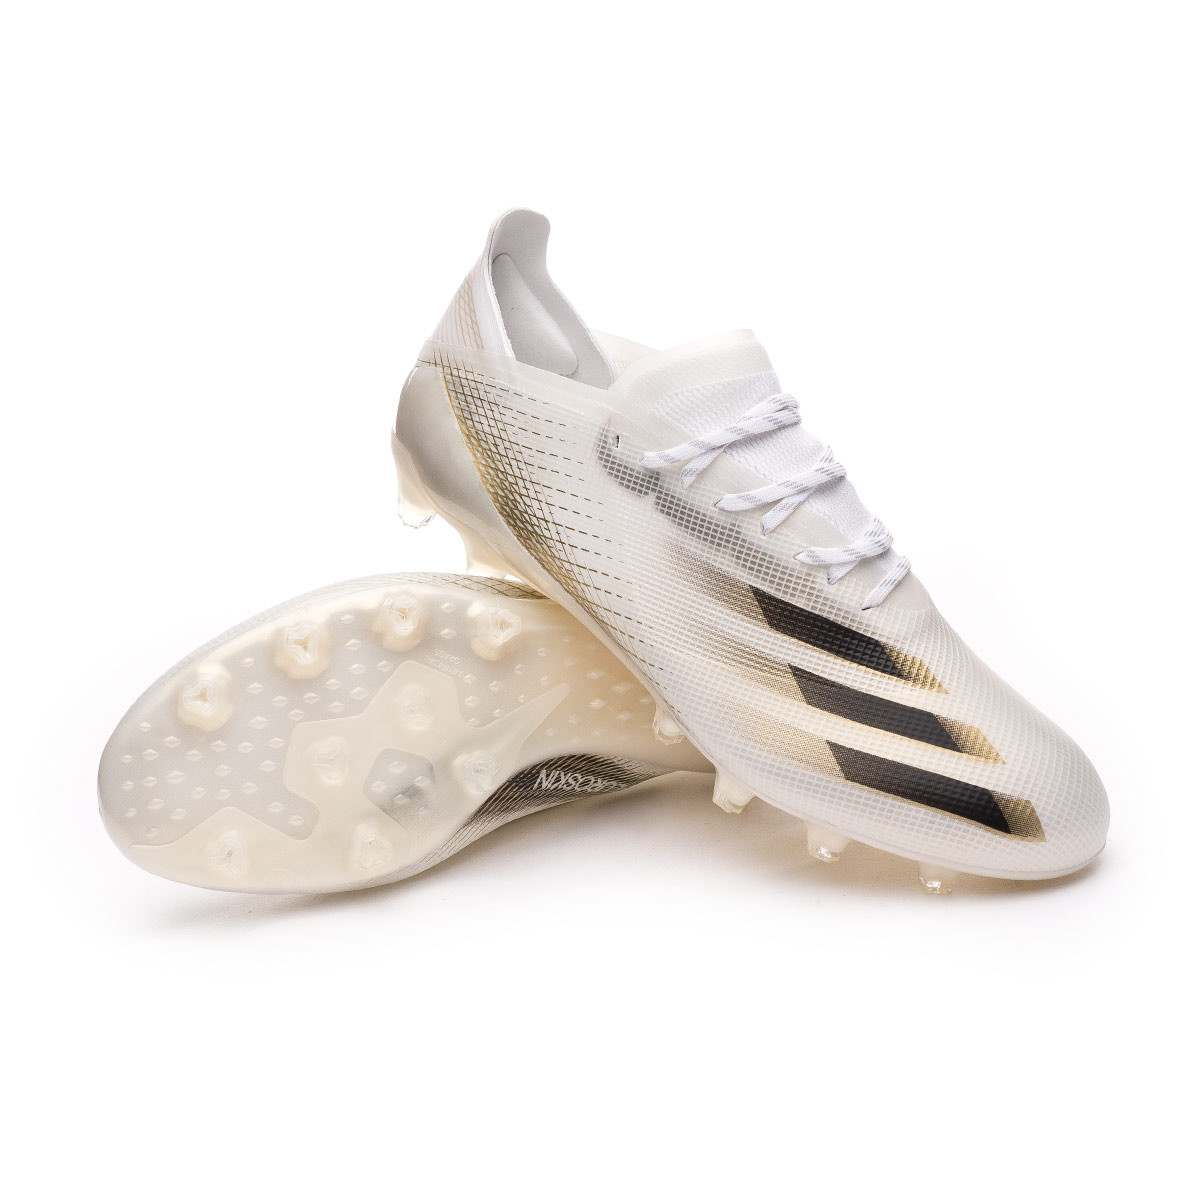 adidas X Ghosted .1 AG Football Boots